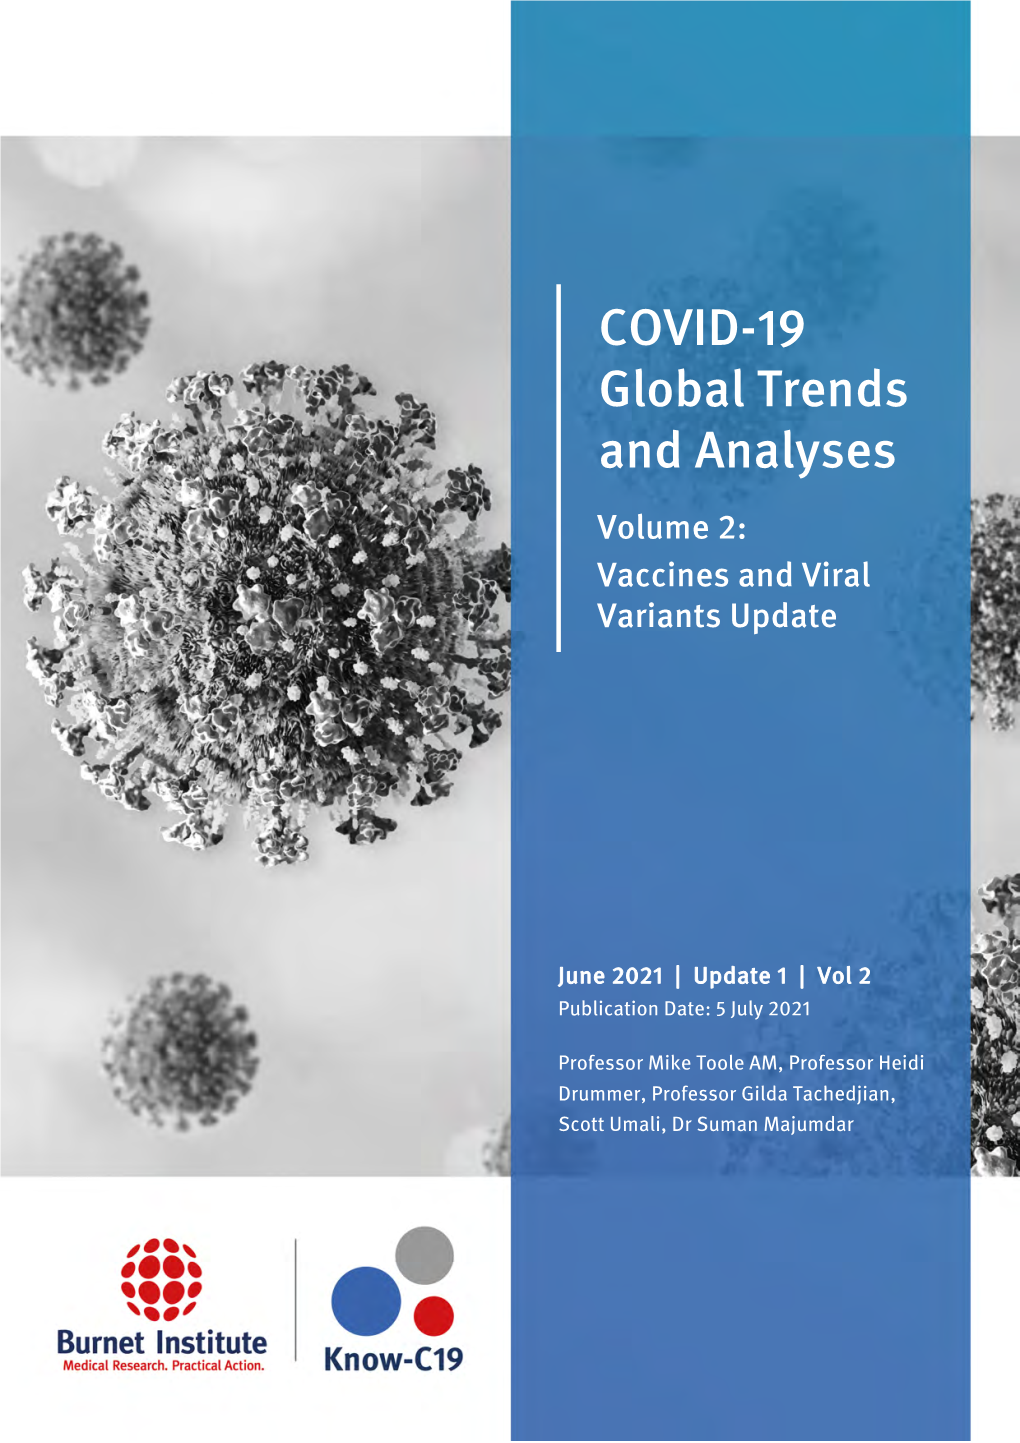 COVID-19 Global Trends and Analyses